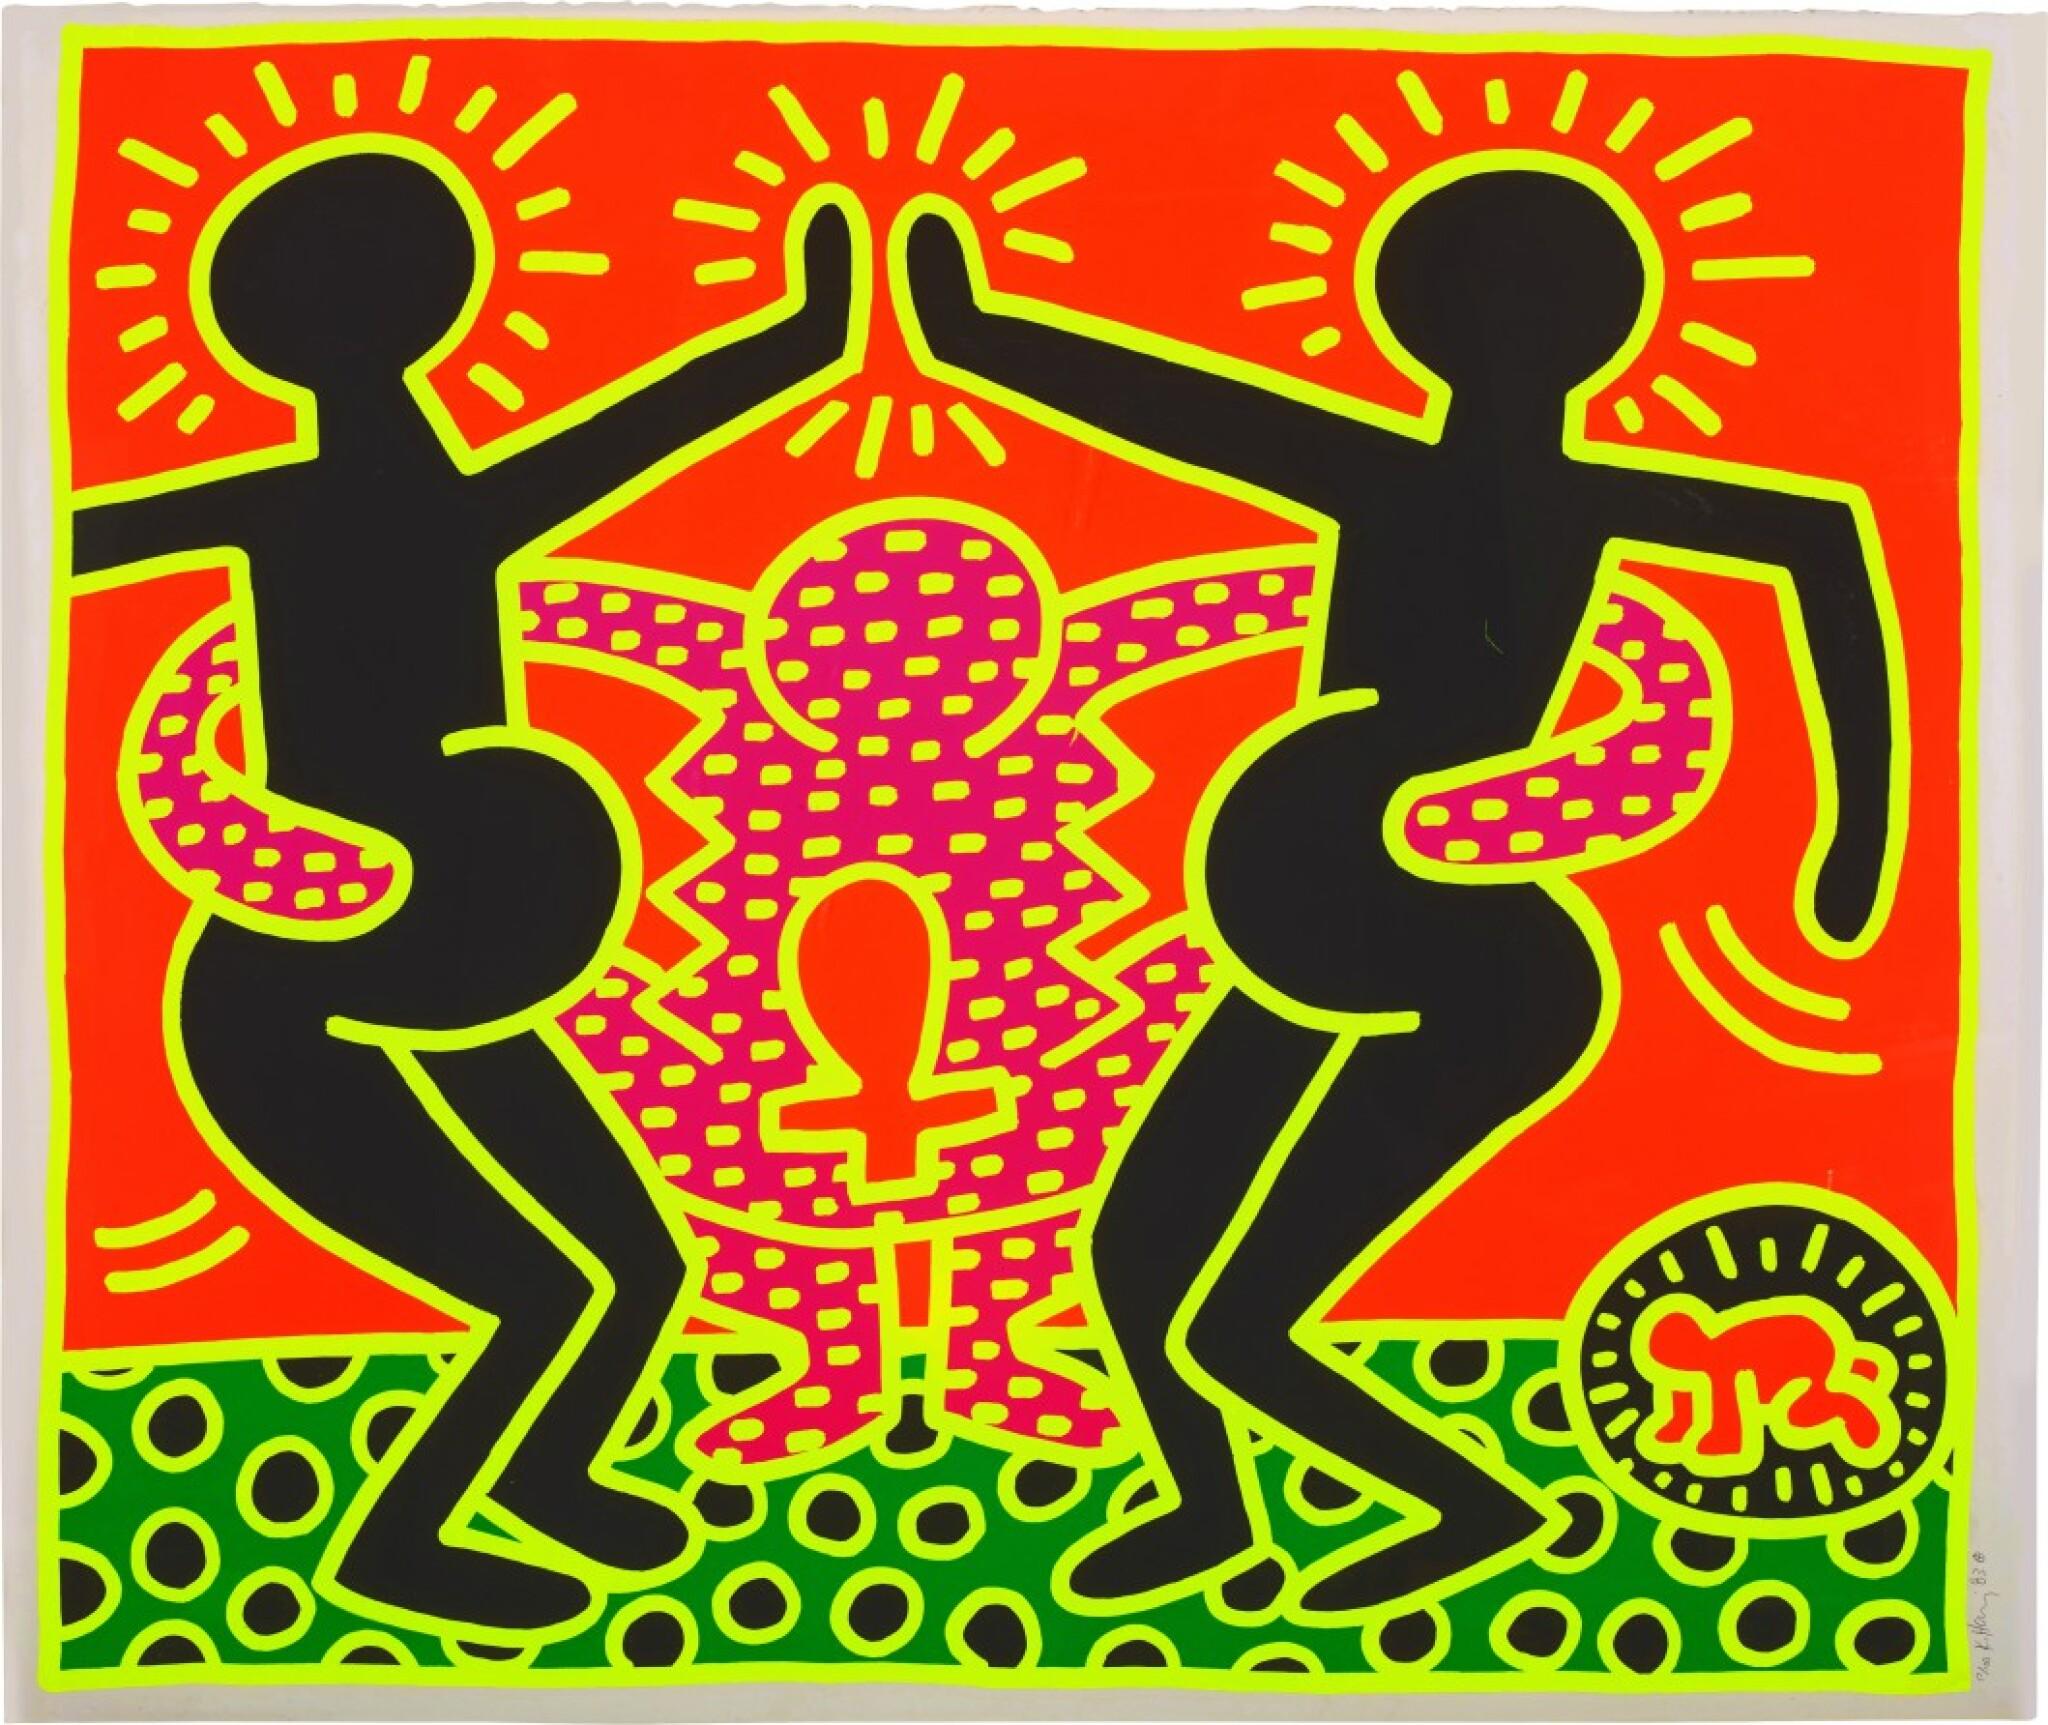 Keith Haring Landscape Print - Plate 5 from Fertility Suite 